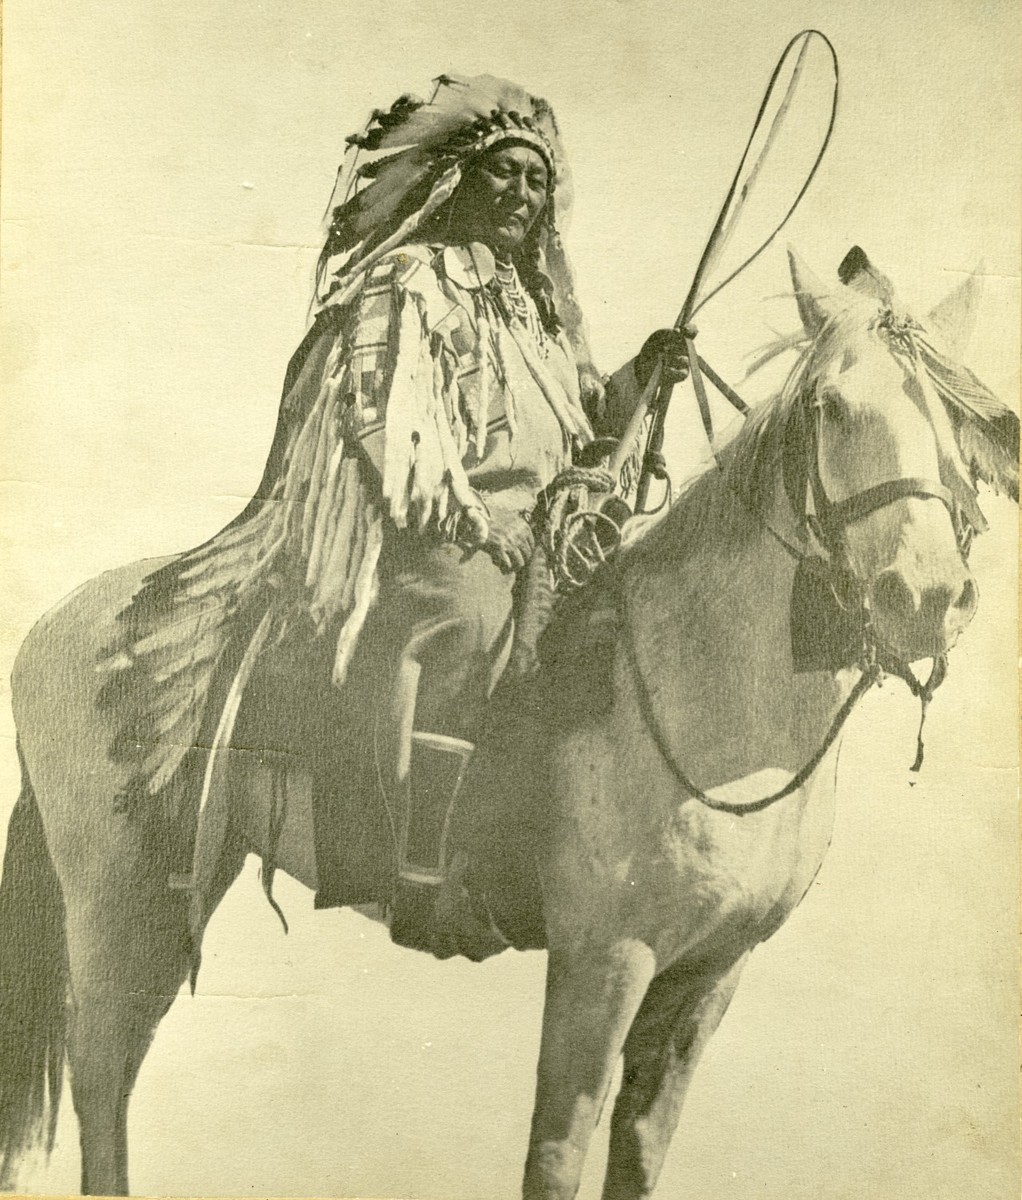 Alaxchíiahush wearing his war shirt decorated with ermines and a feathered headdress, sitting astride a white horse.